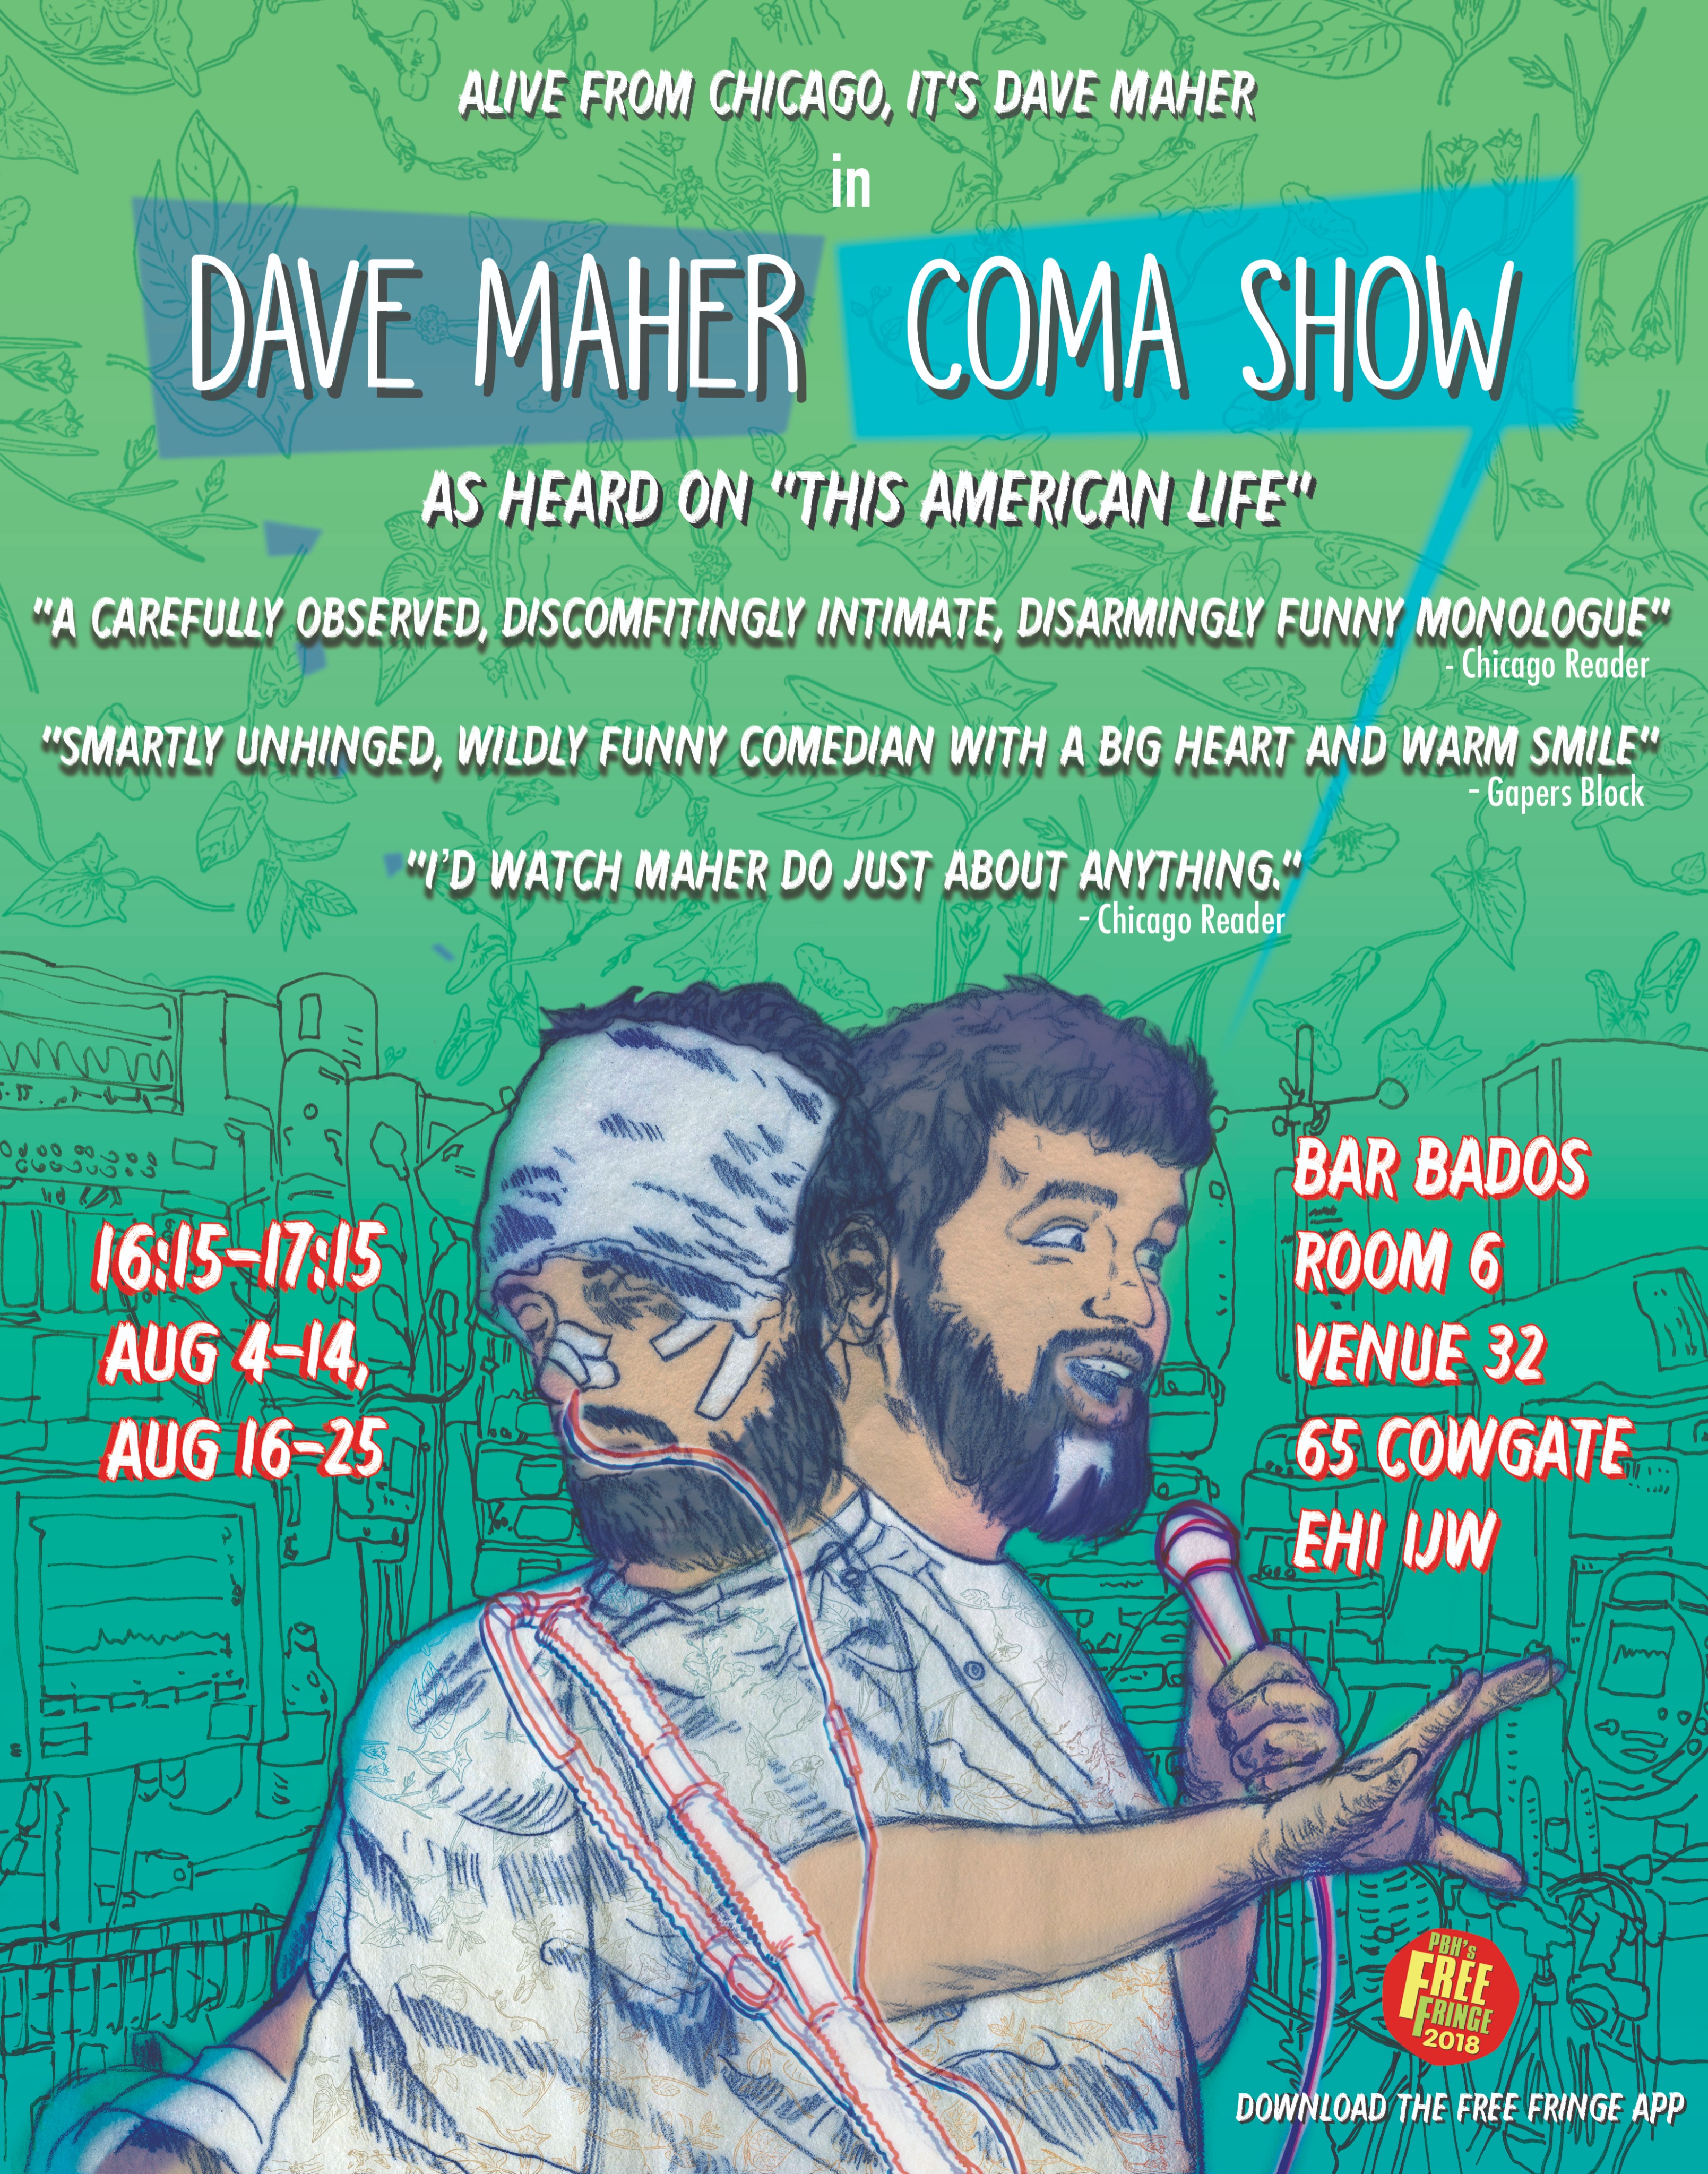 The poster for Dave Maher Coma Show